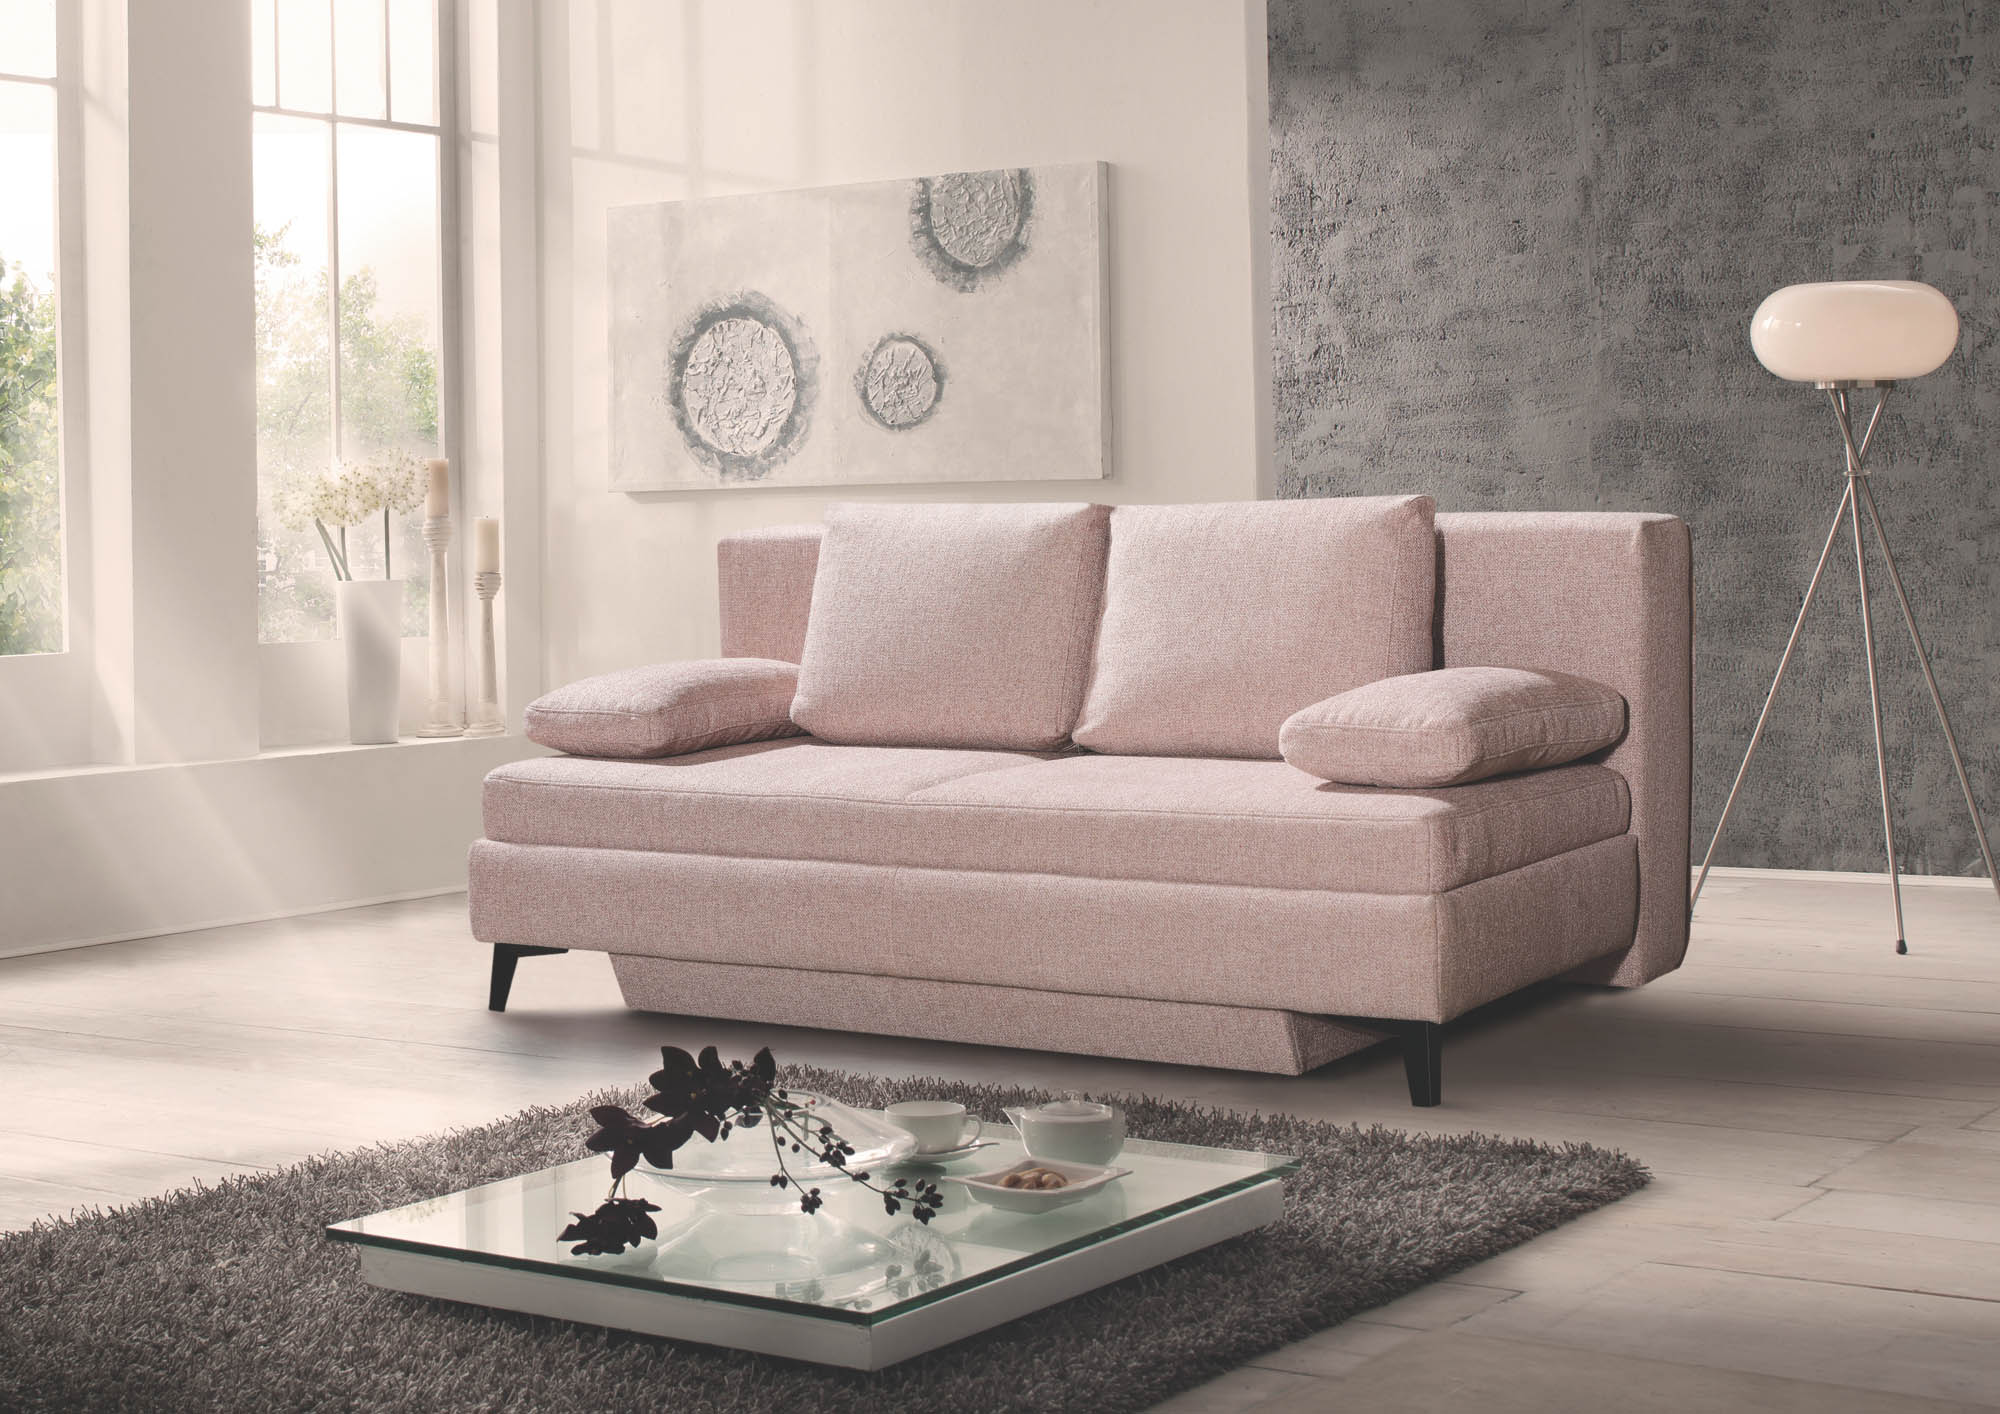 Restyl Berry Schlafsofa in Stoff Sand 